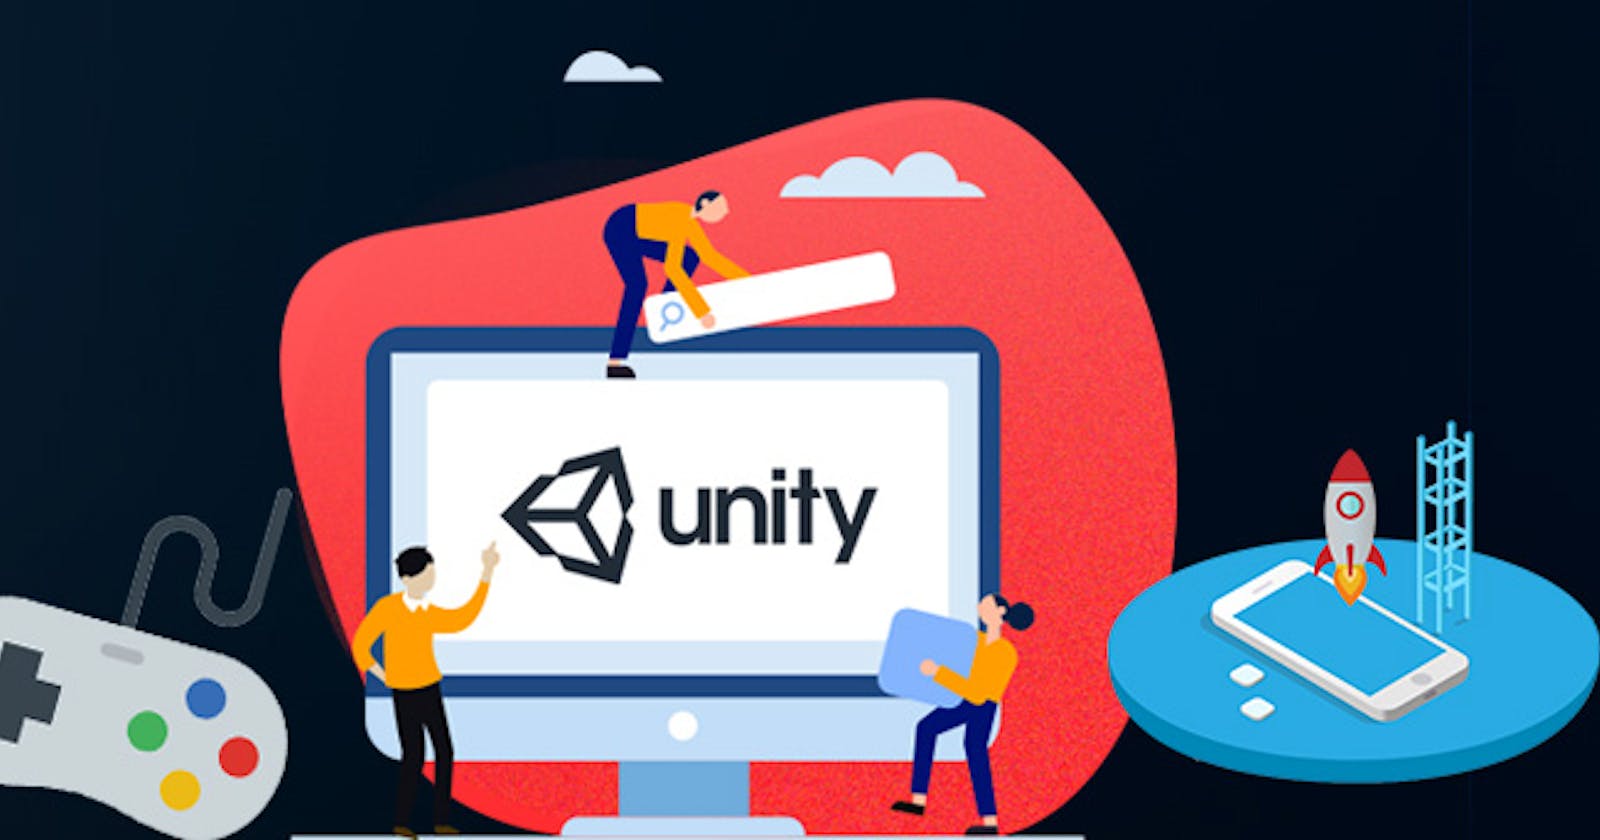 What You Need To Know About Hiring Unity Game Developers